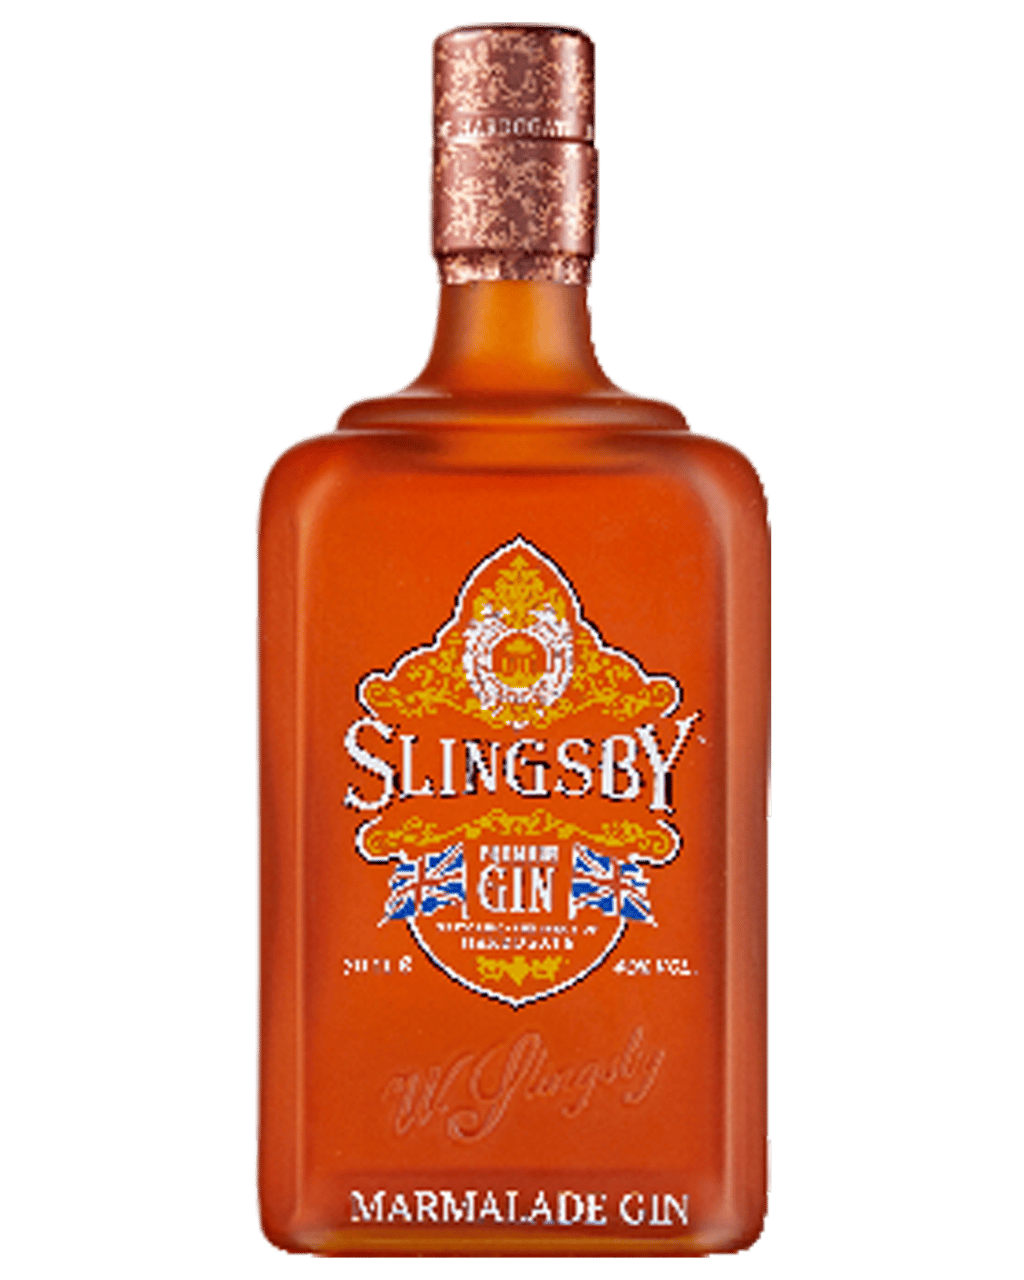 Slingsby Marmalade Gin 700ml Unbeatable Prices Buy Online Best Deals With Delivery Dan